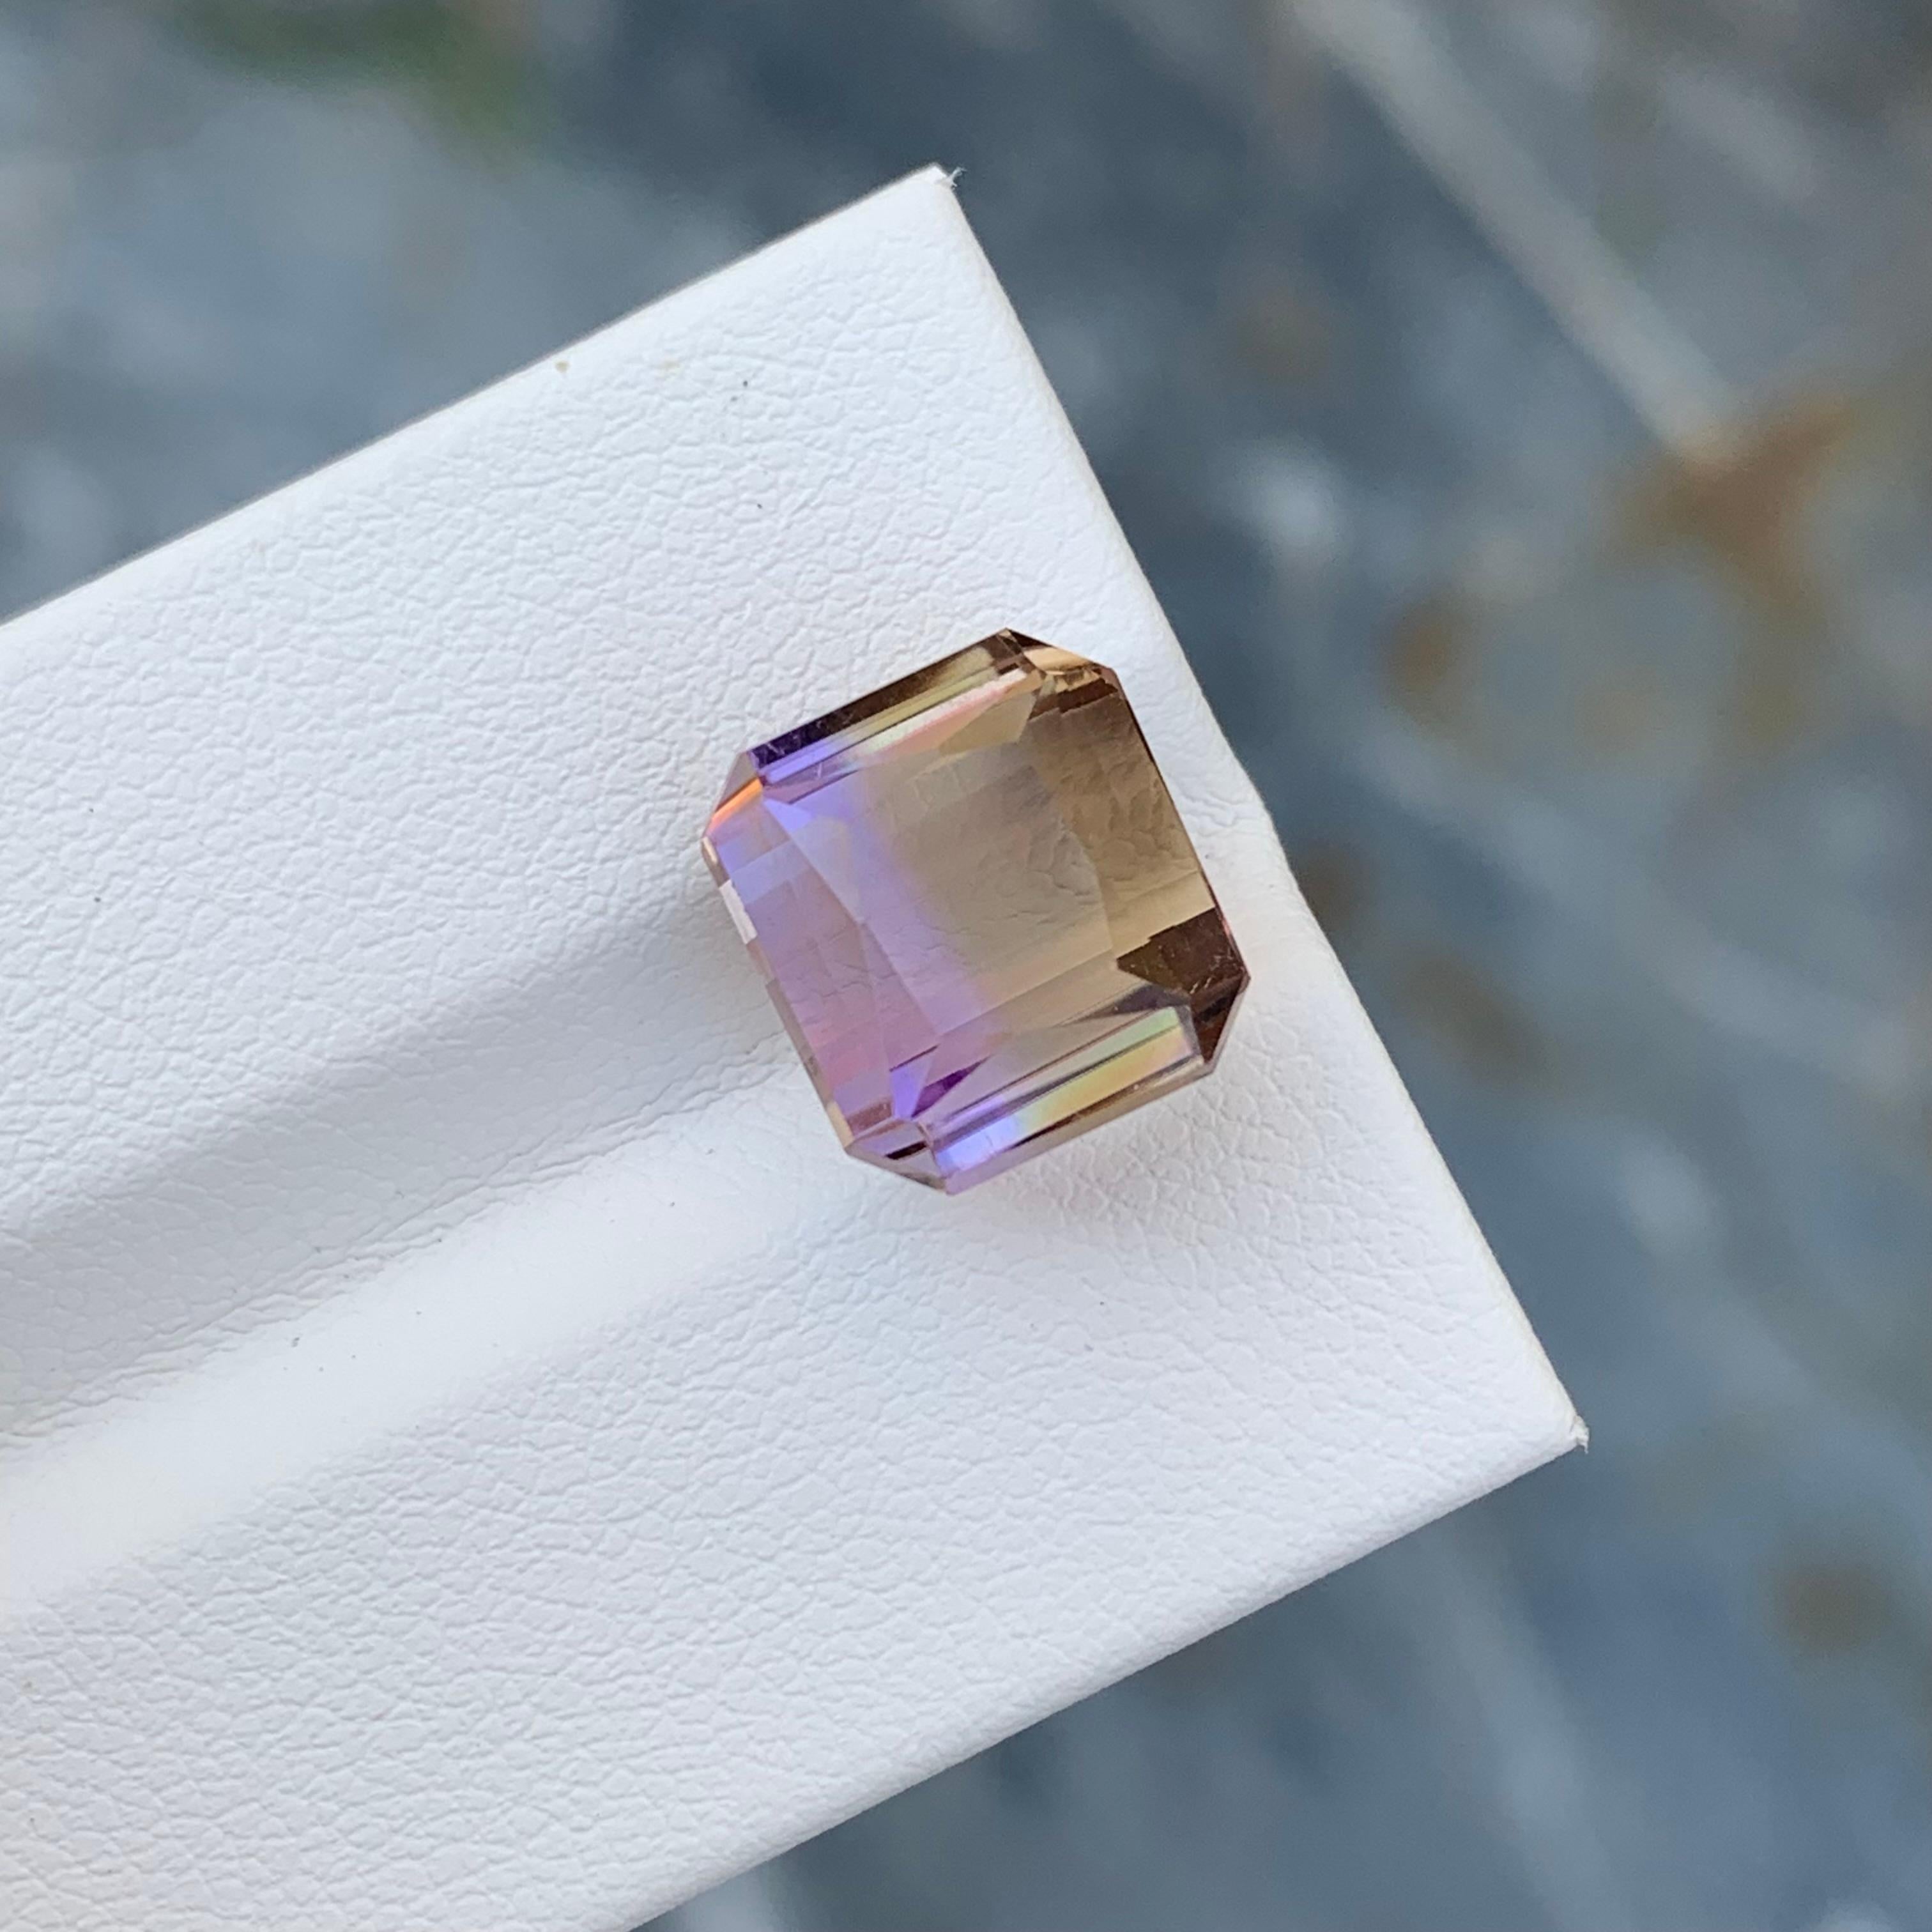 Faceted Ametrine
Weight: 9.30 Carats
Dimension; 11.3 x 10.2 x 9.3 Mm
Origin: Brazil
Color: Purple & Yellow
Shape: Octagon 
Treatment: Non
Certficate: On Demand
.
Ametrine is a unique and captivating gemstone that displays a harmonious blend of two